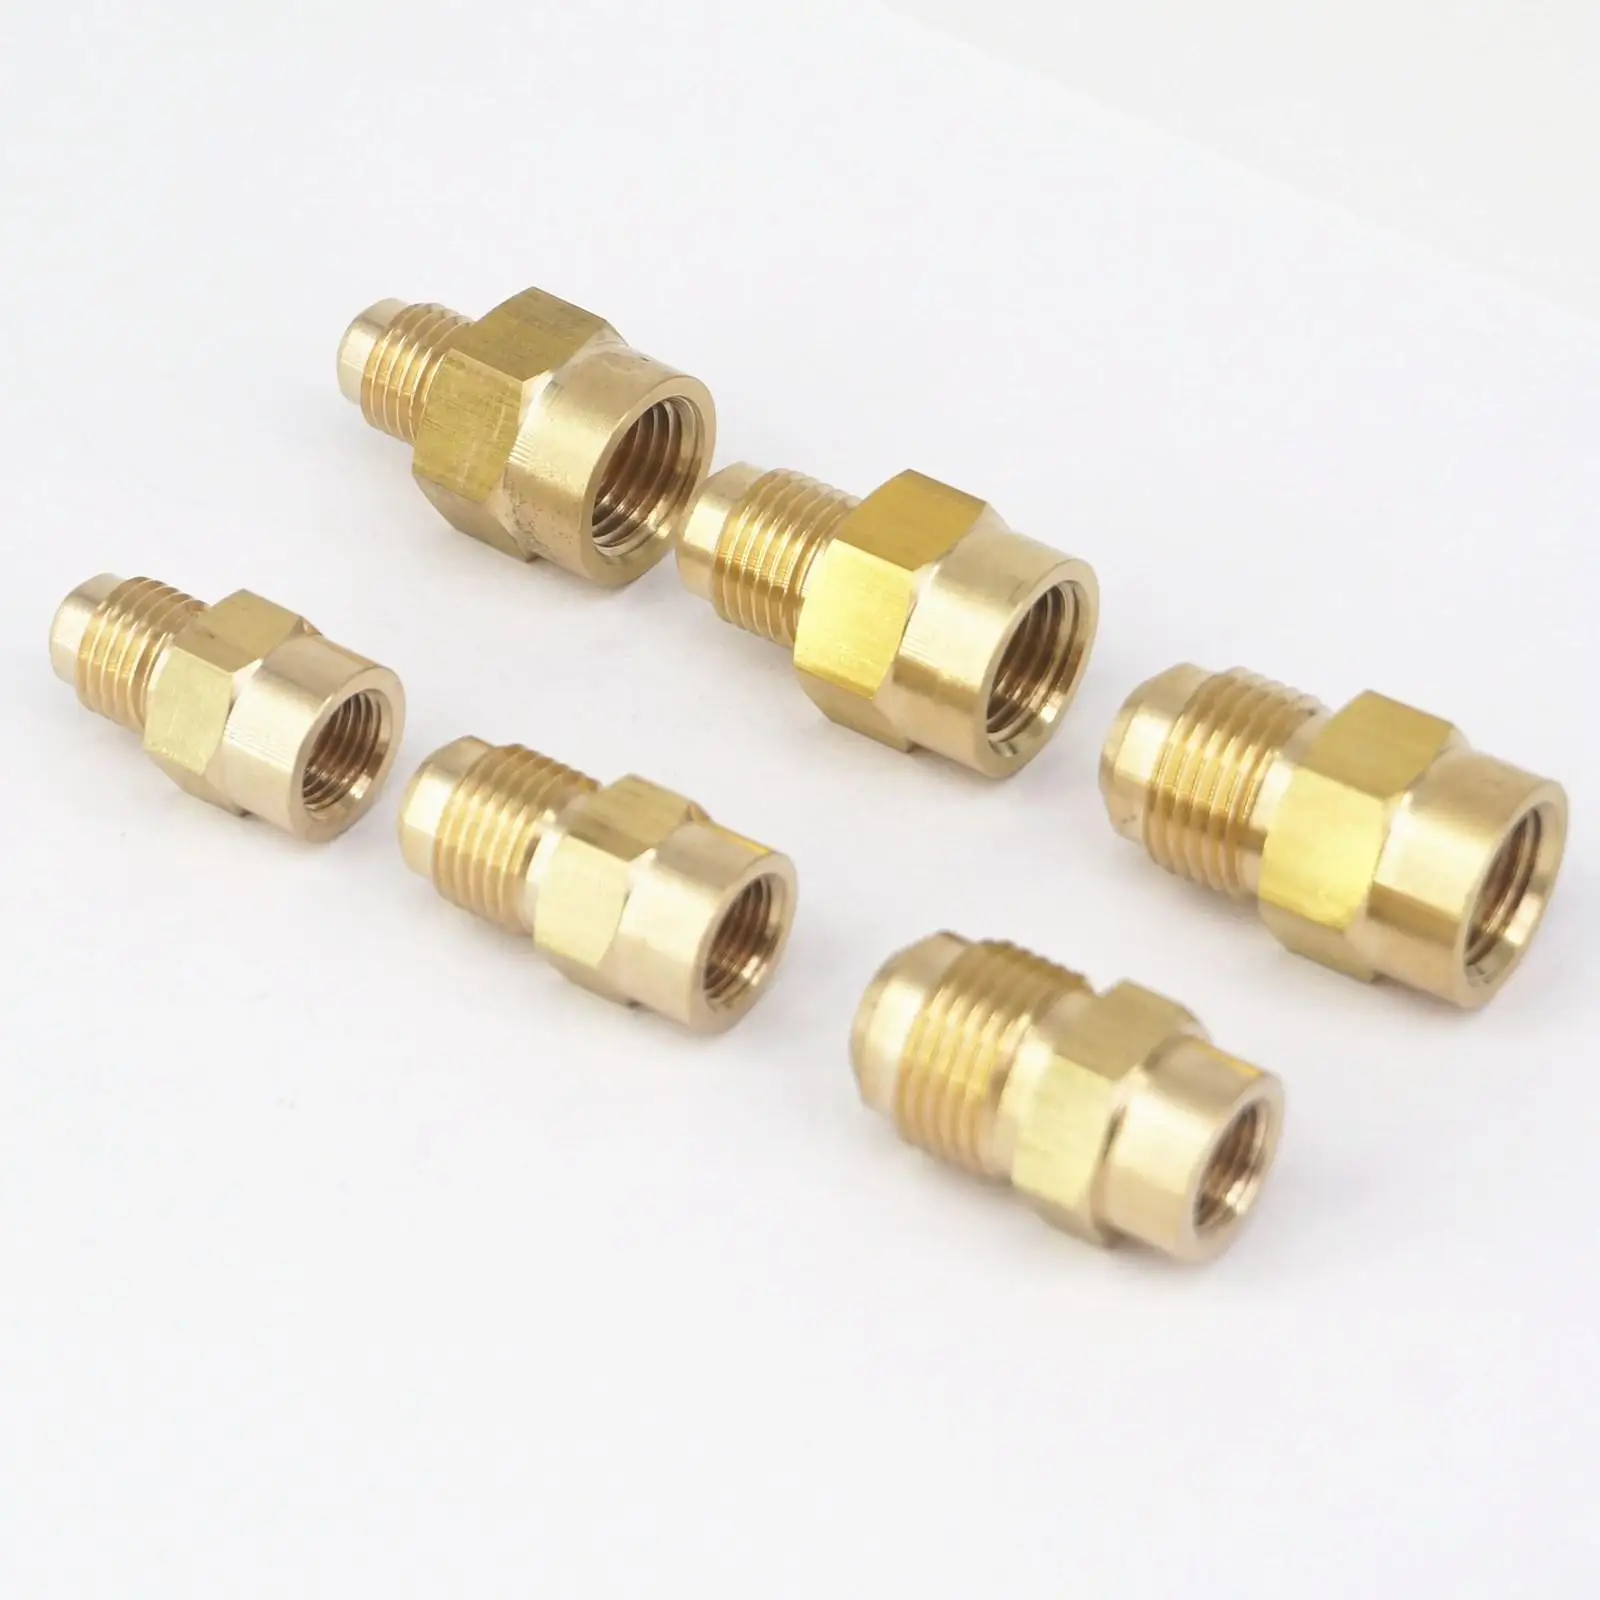 

Fit Tube OD 1/4" 5/16" 3/8"- 1/8" 1/4 NPT Female Brass SAE 45 Degree Pipe Fittings Adapters 229PSI